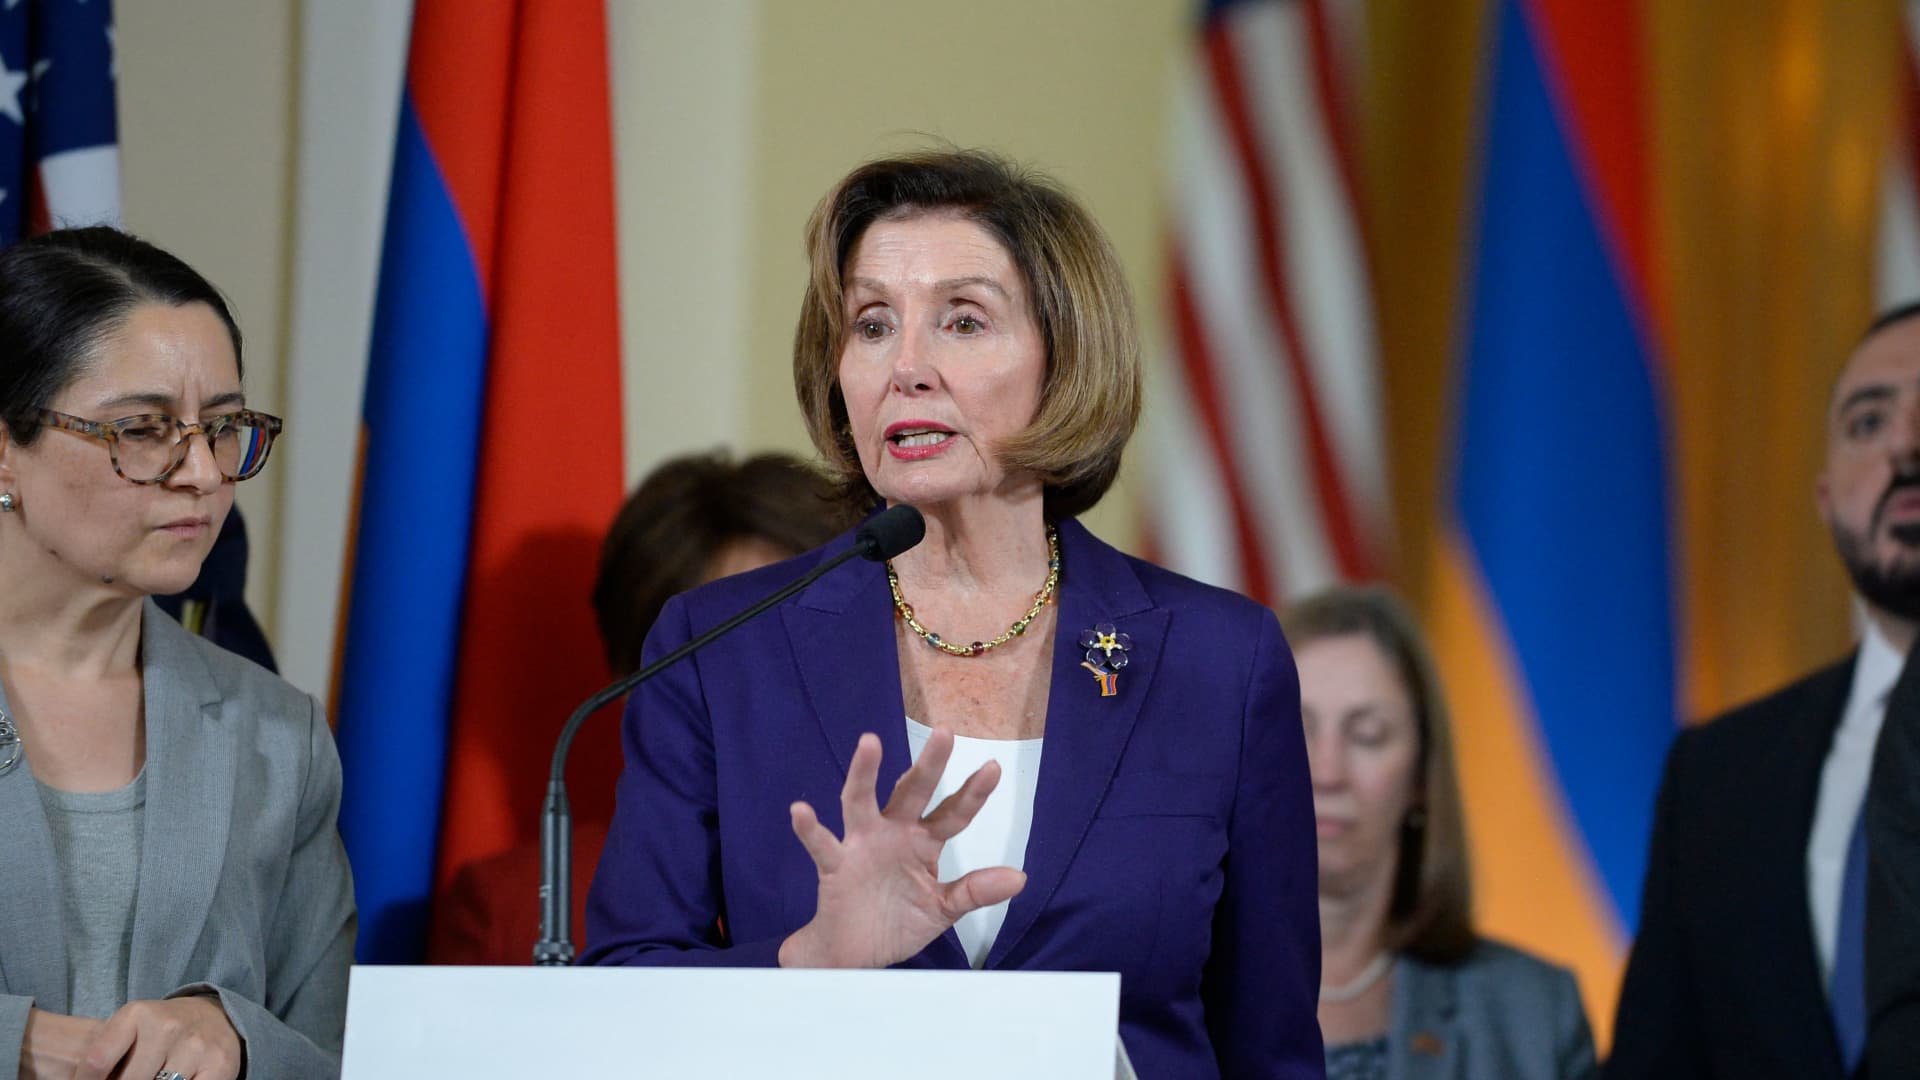 Speaker Pelosi strongly condemns ‘illegal and deadly attacks by Azerbaijan’ during visit to Armenia